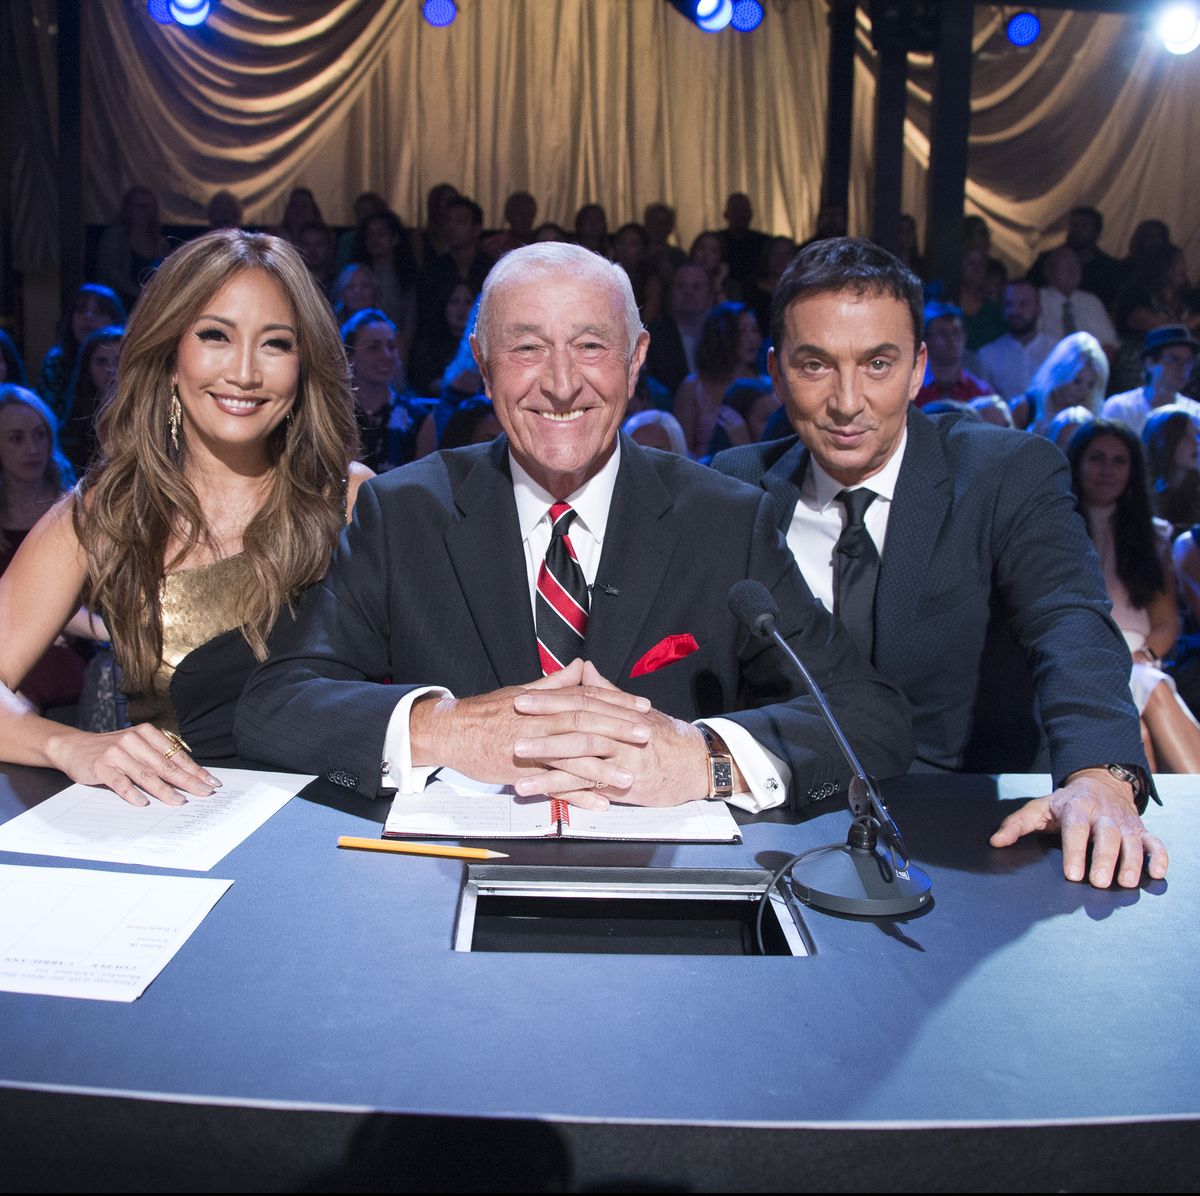 ABC's "Dancing With the Stars" - Season 27 - Week Two